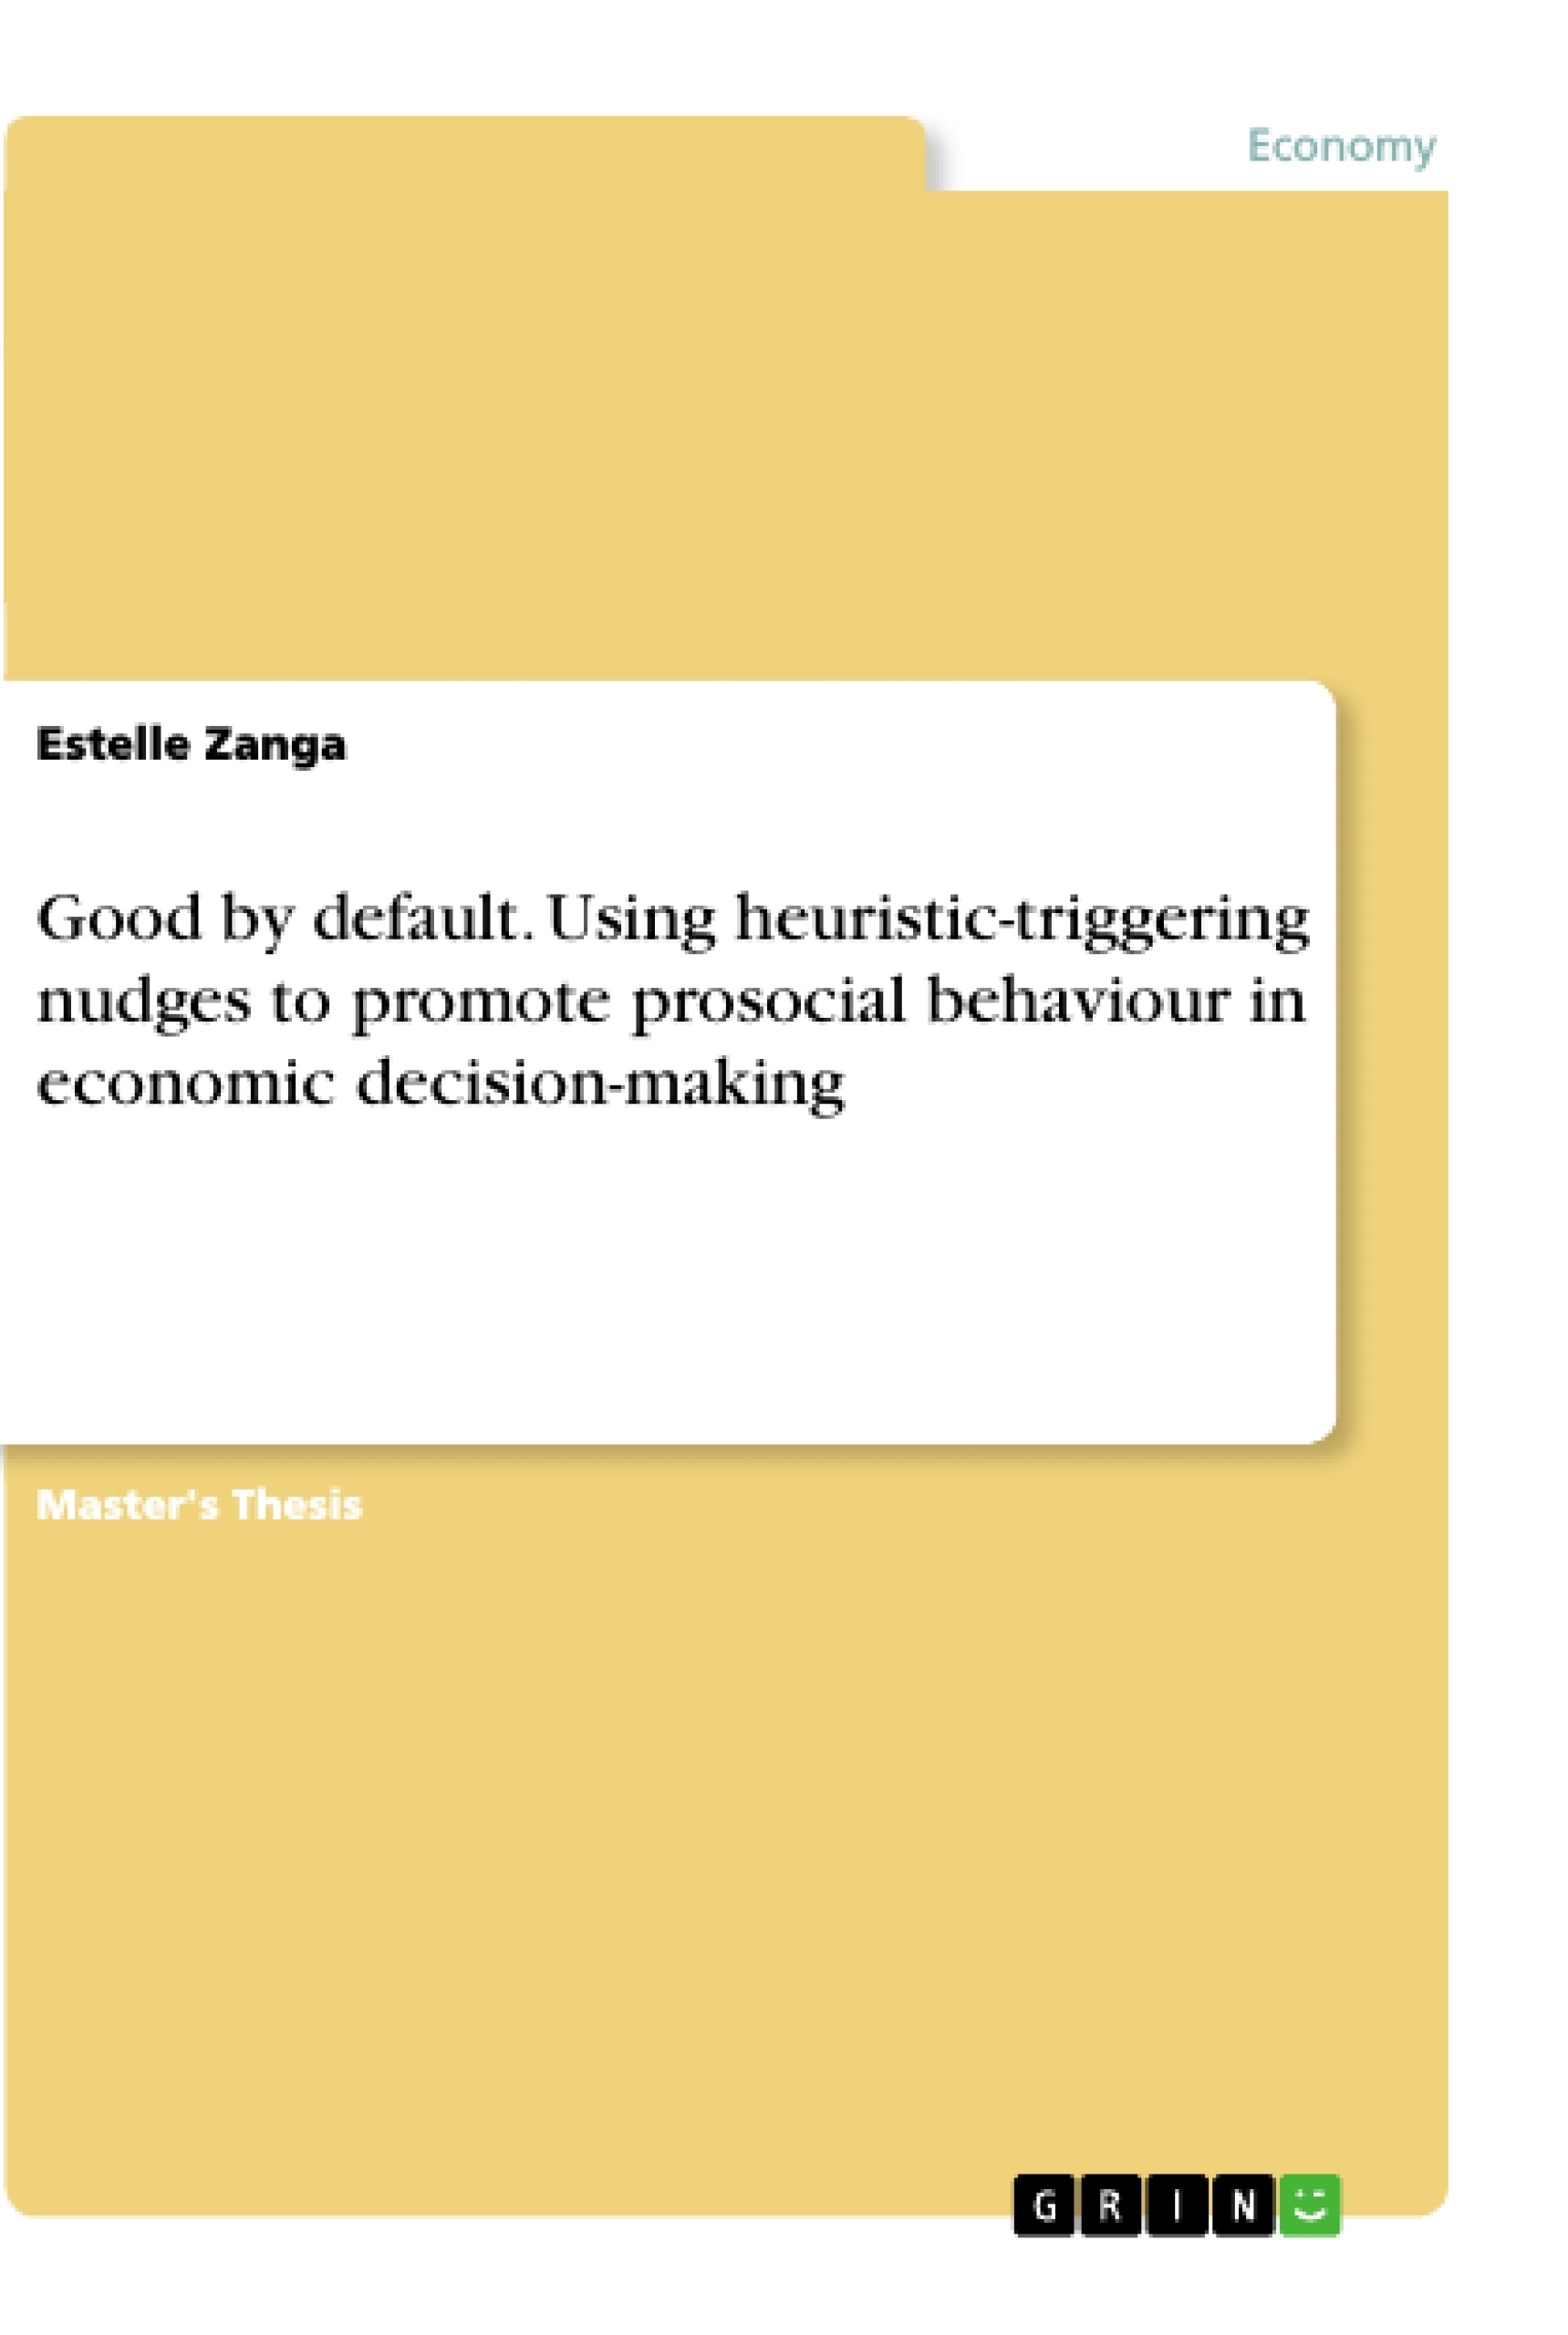 Title: Good by default. Using heuristic-triggering nudges to promote prosocial behaviour in economic decision-making